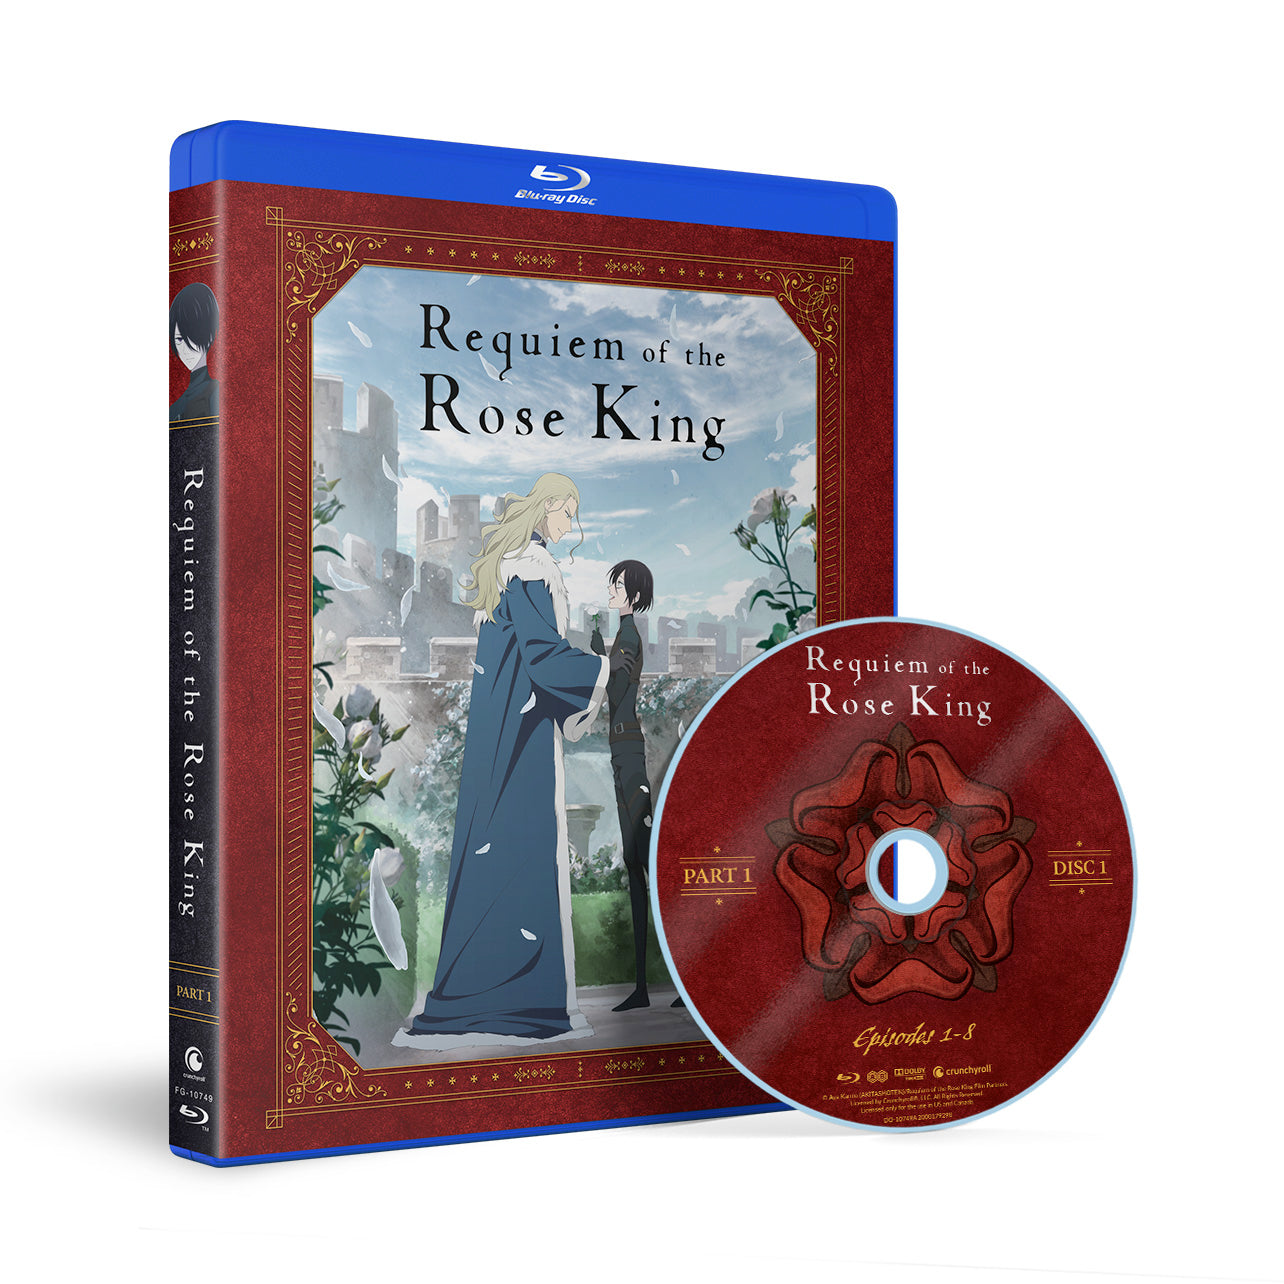 Requiem of the Rose King - Part 1 - Blu-ray image count 1